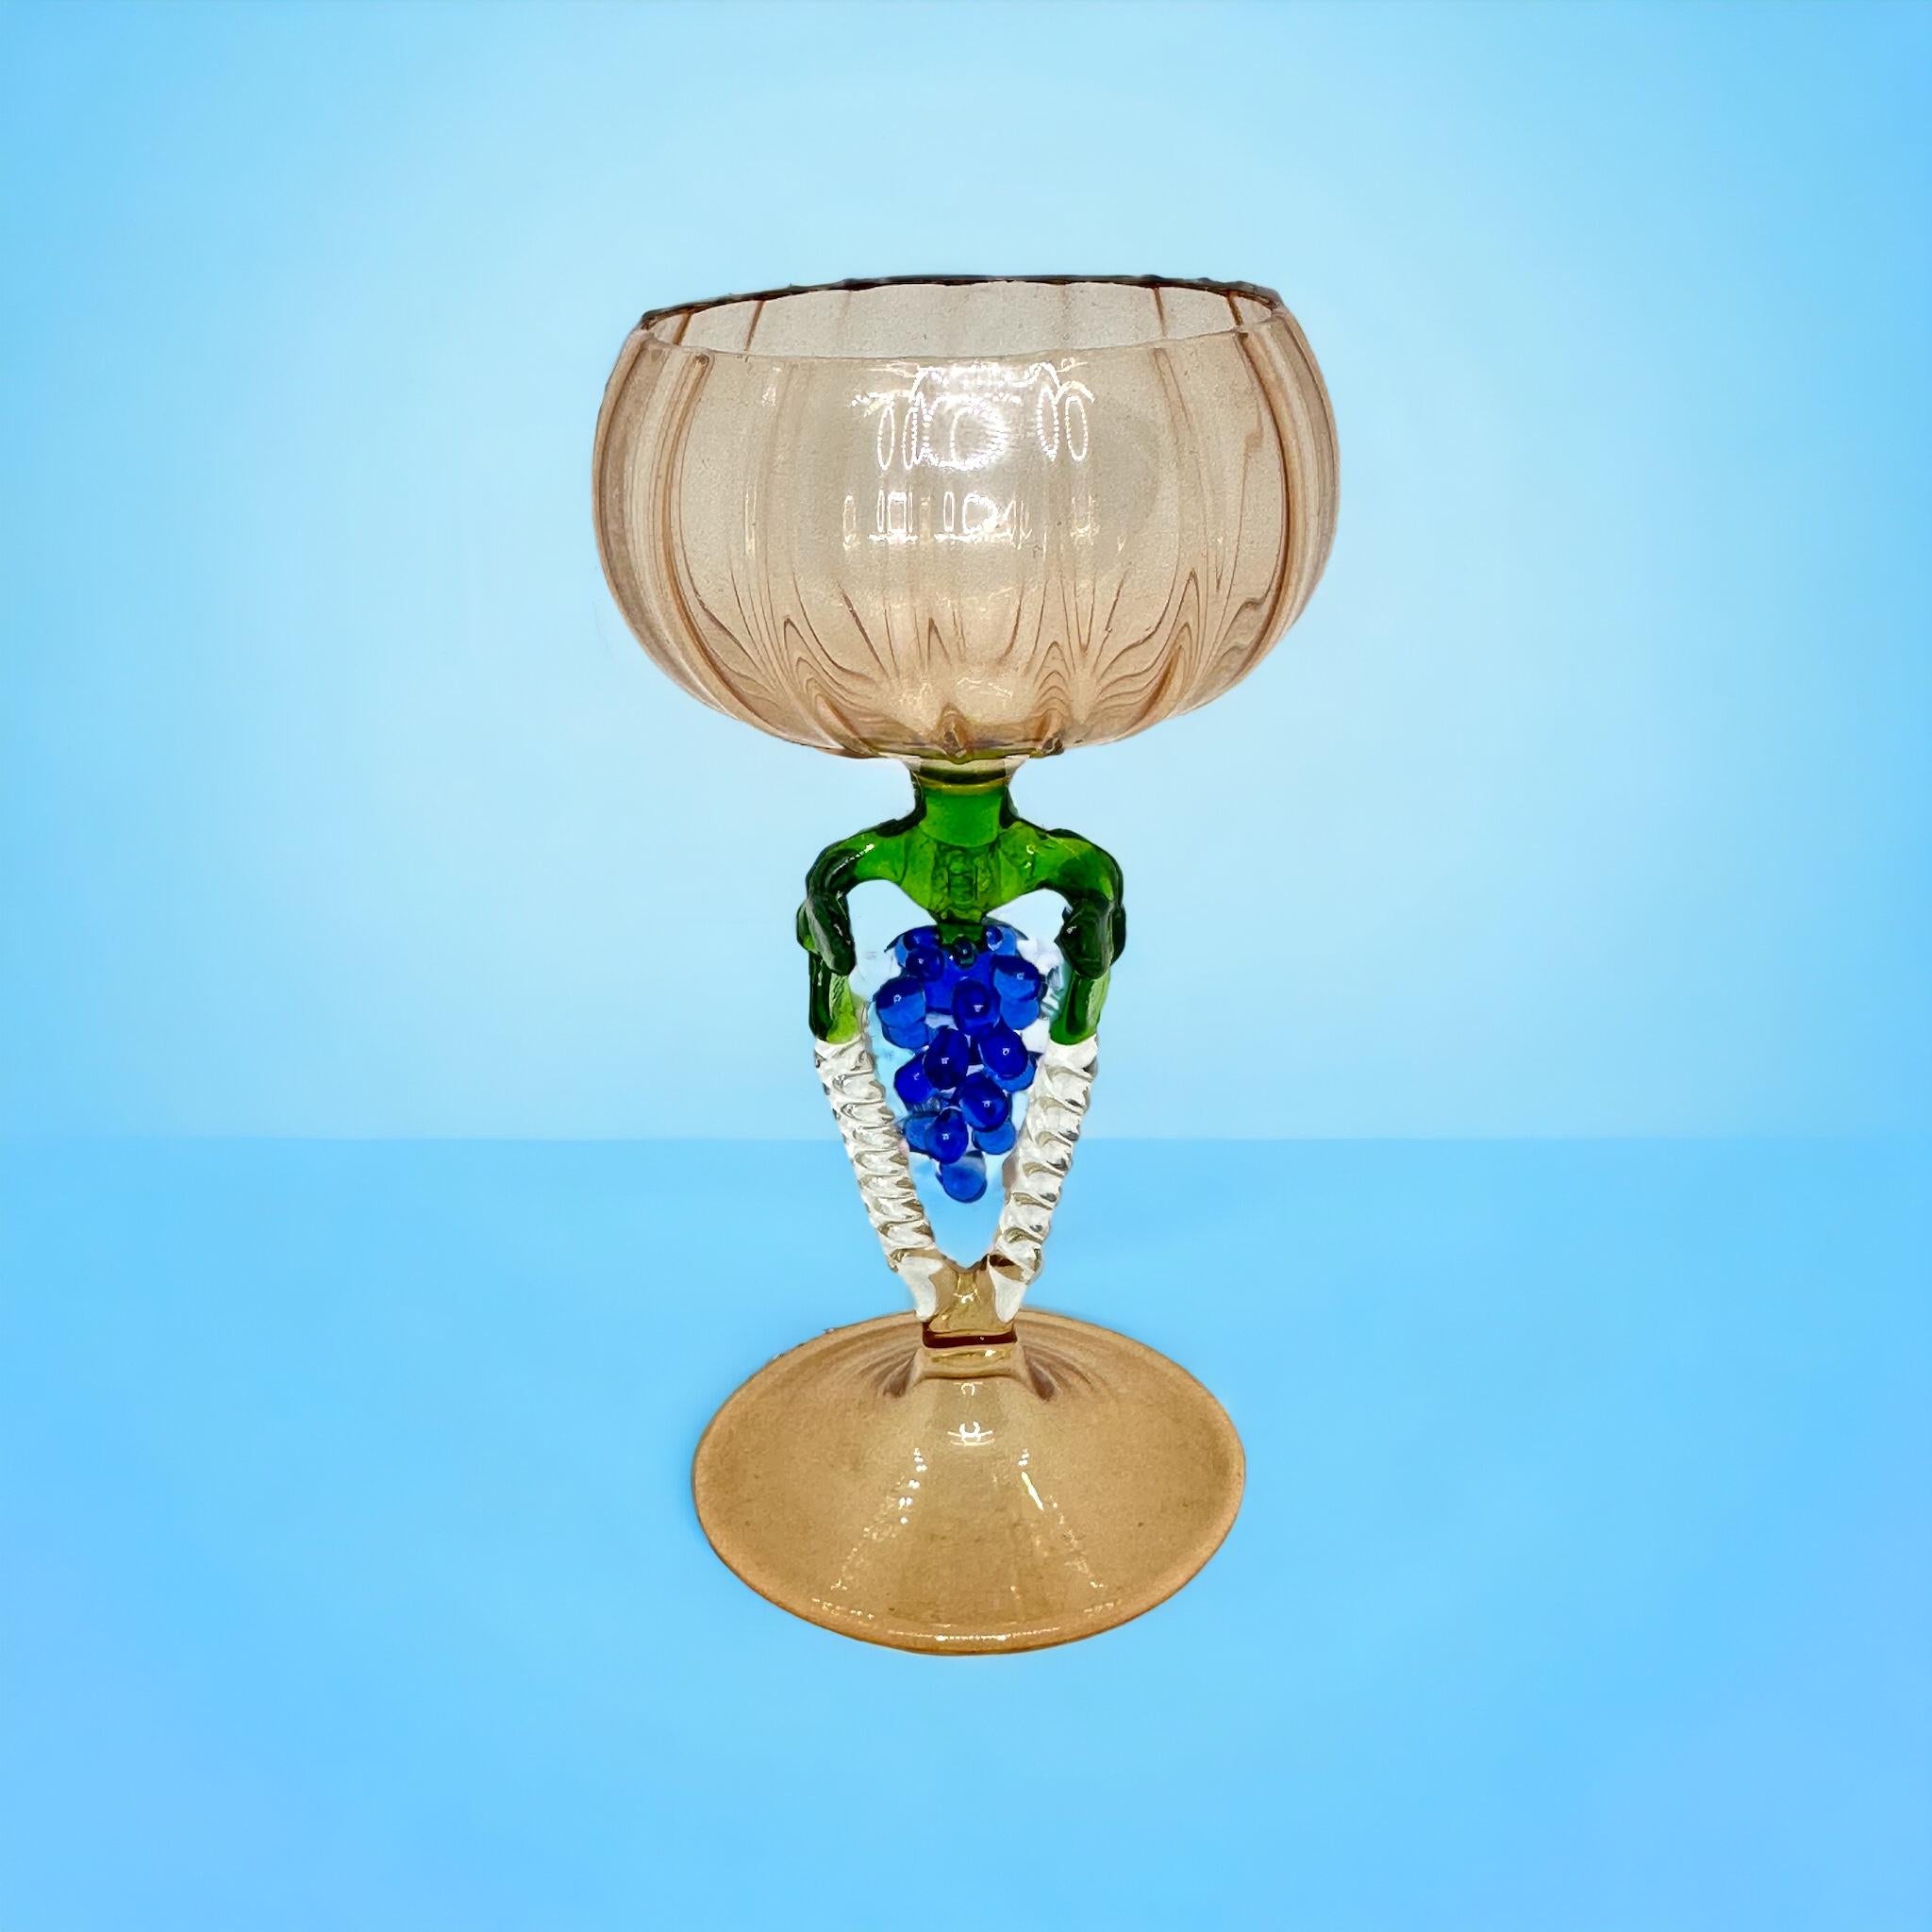 This is a beautiful single vintage stemmed cocktail glass from Austria. It features a bunch of grapes shaft and is in Bimini art style. The light pink glass has an embossed design, the stem is a bunch of grapes in blue color. The base is a beautiful